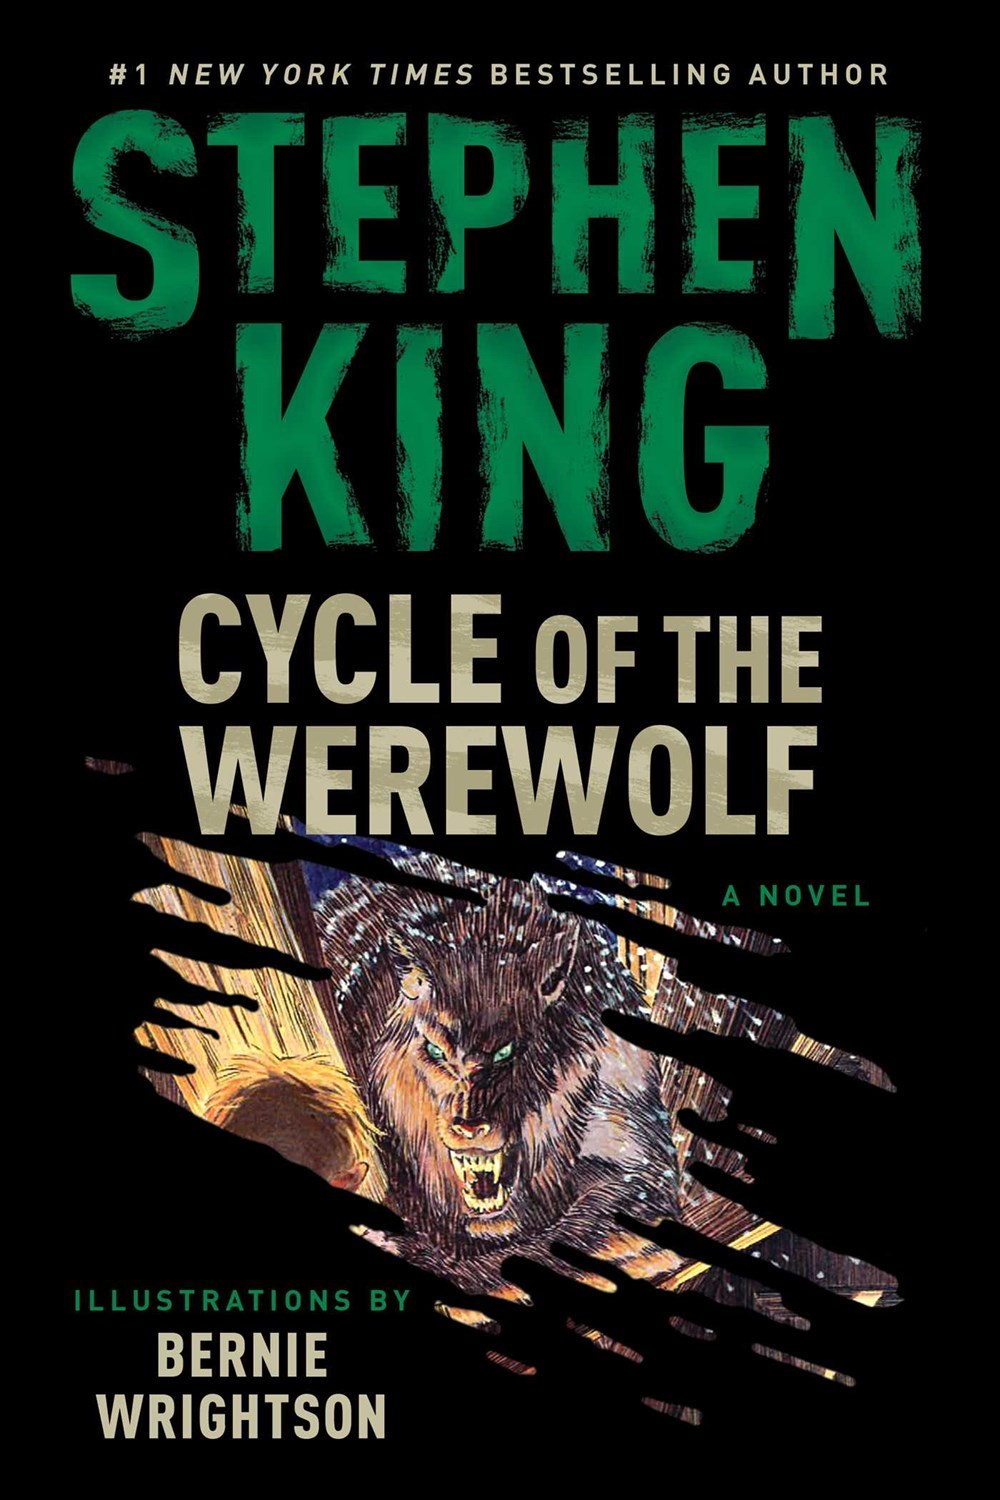 Cycle of the Werewolf by Stephen King PDF Download